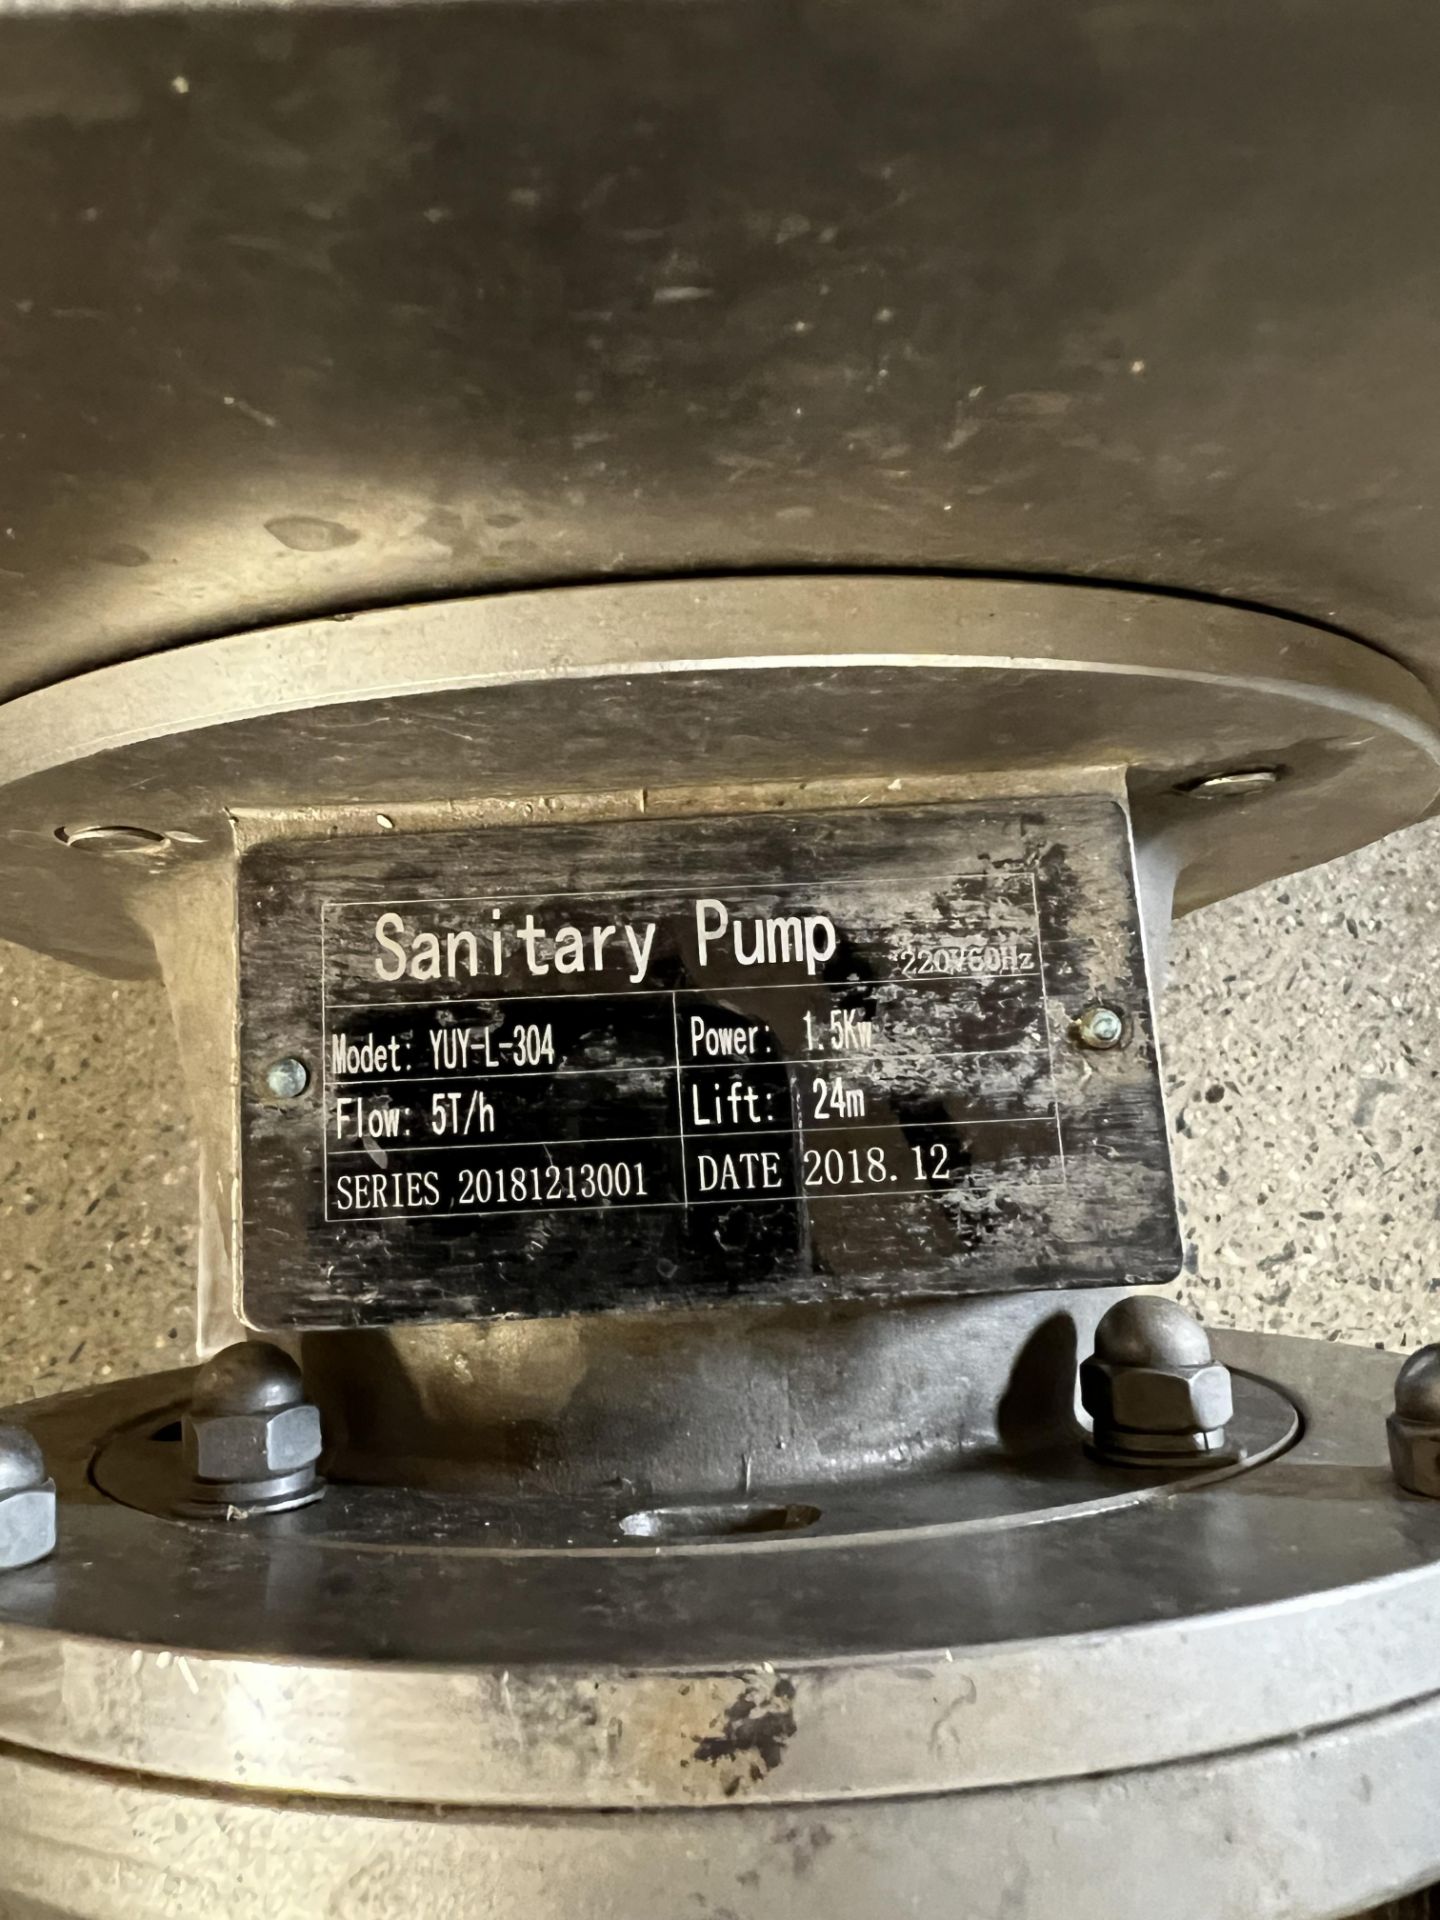 2018 ABS Sanitary Pump #YUY-L-304 (Located In Lancaster) - Image 2 of 2